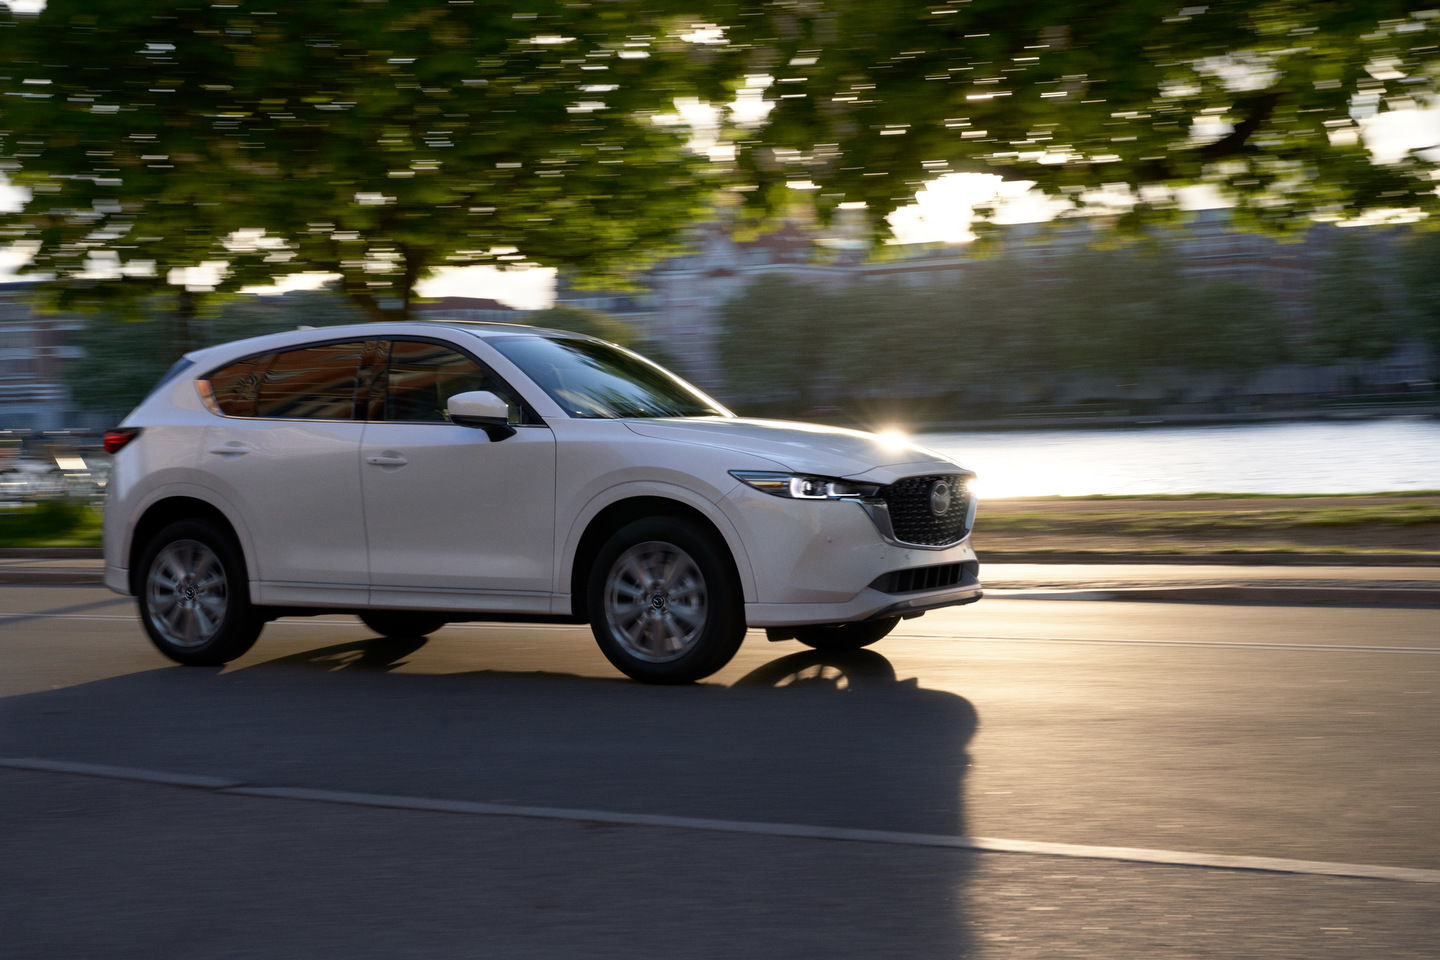 The New 2022 Mazda CX-5 Distinguishes Itself with its Safety Technologies